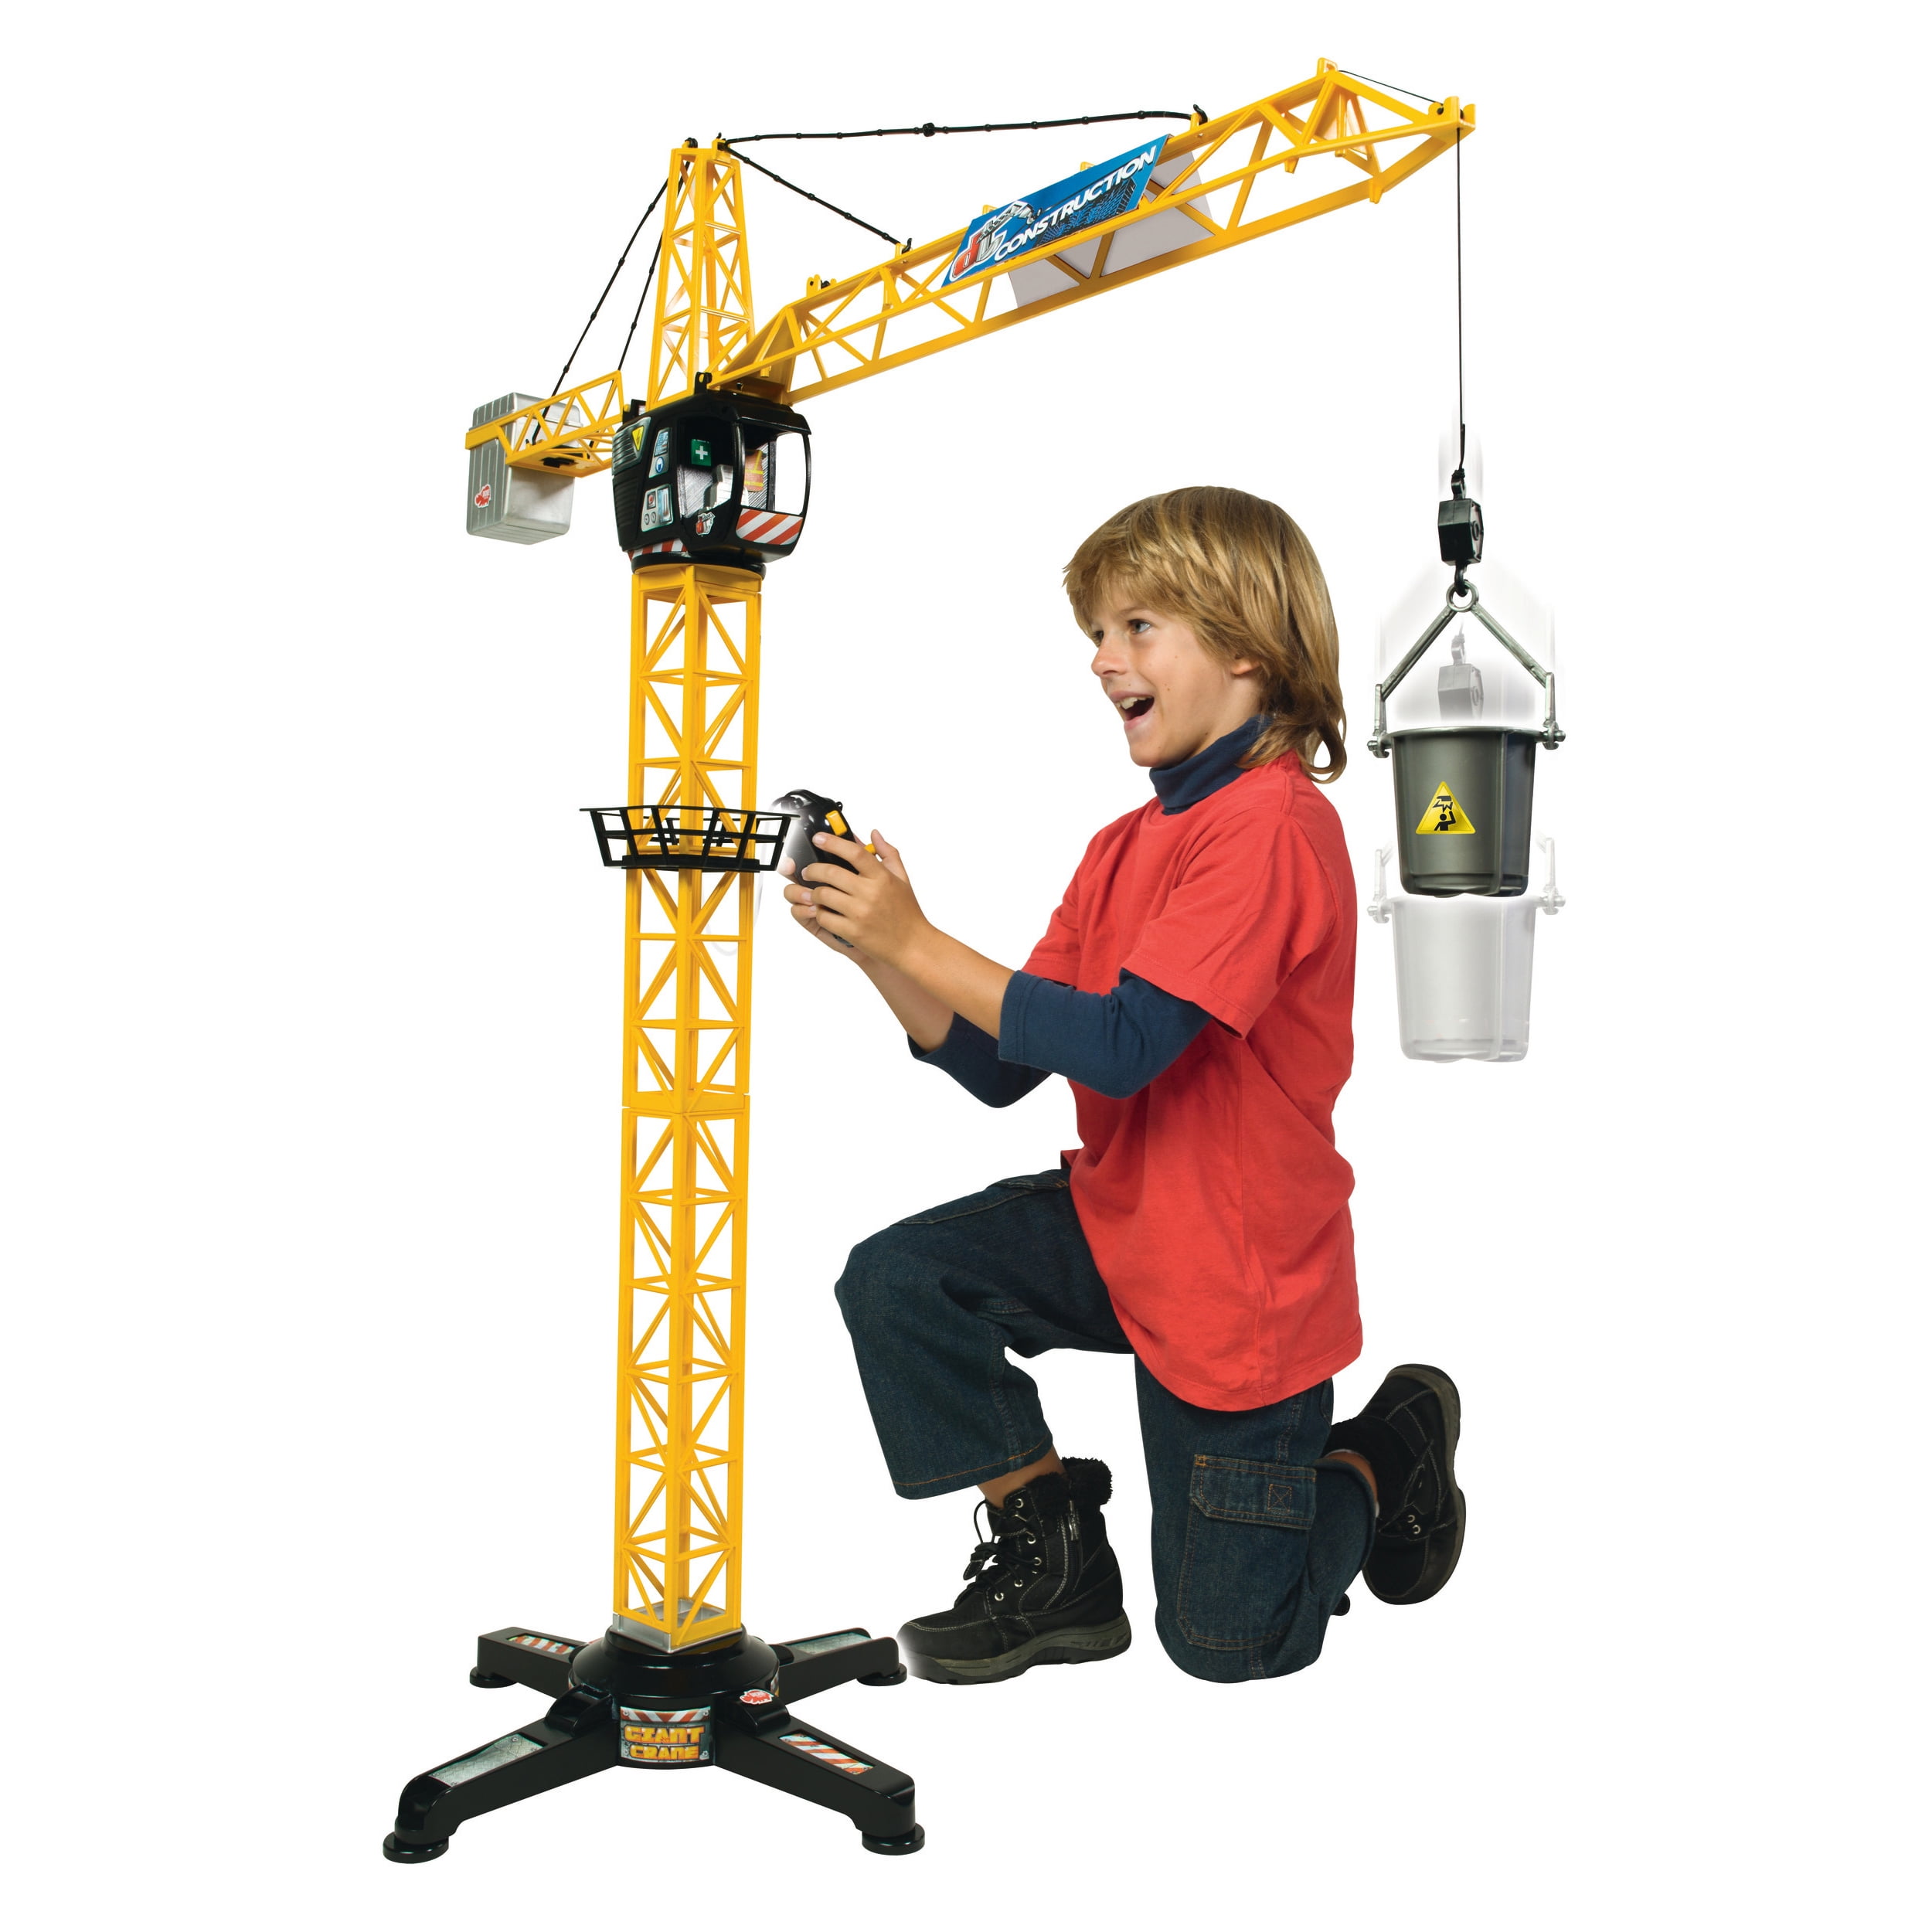 Winch Dickie Toys 201139013 Giant Electric Toy Crane Remote Controlled for Ages 3+ 100 cm High with Load Hook Multi-Coloured Bucket and Shovel Online Version 